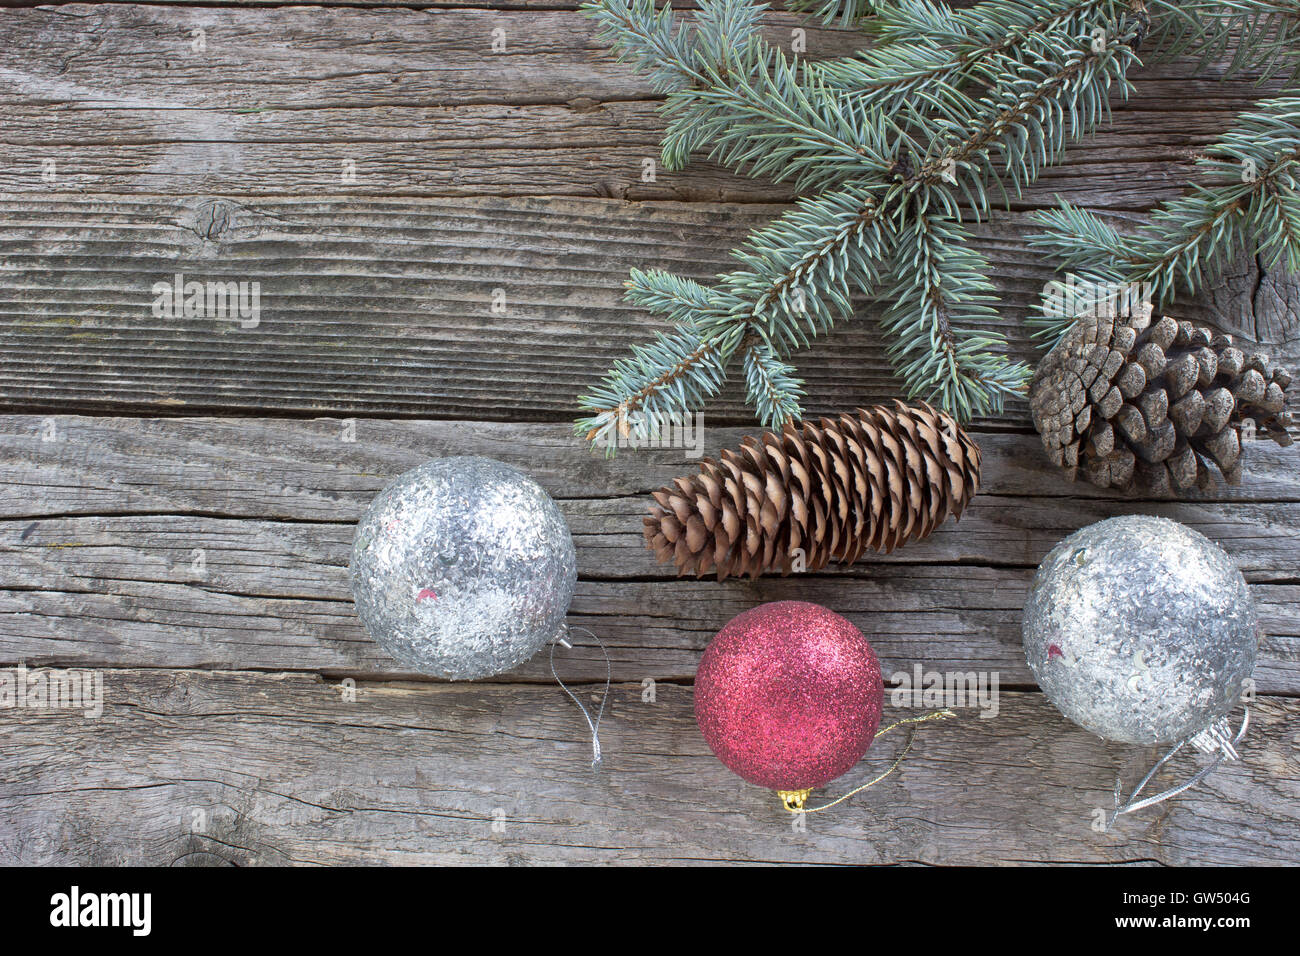 Christmas balls,  pine cones and  needles  on wooden background Stock Photo